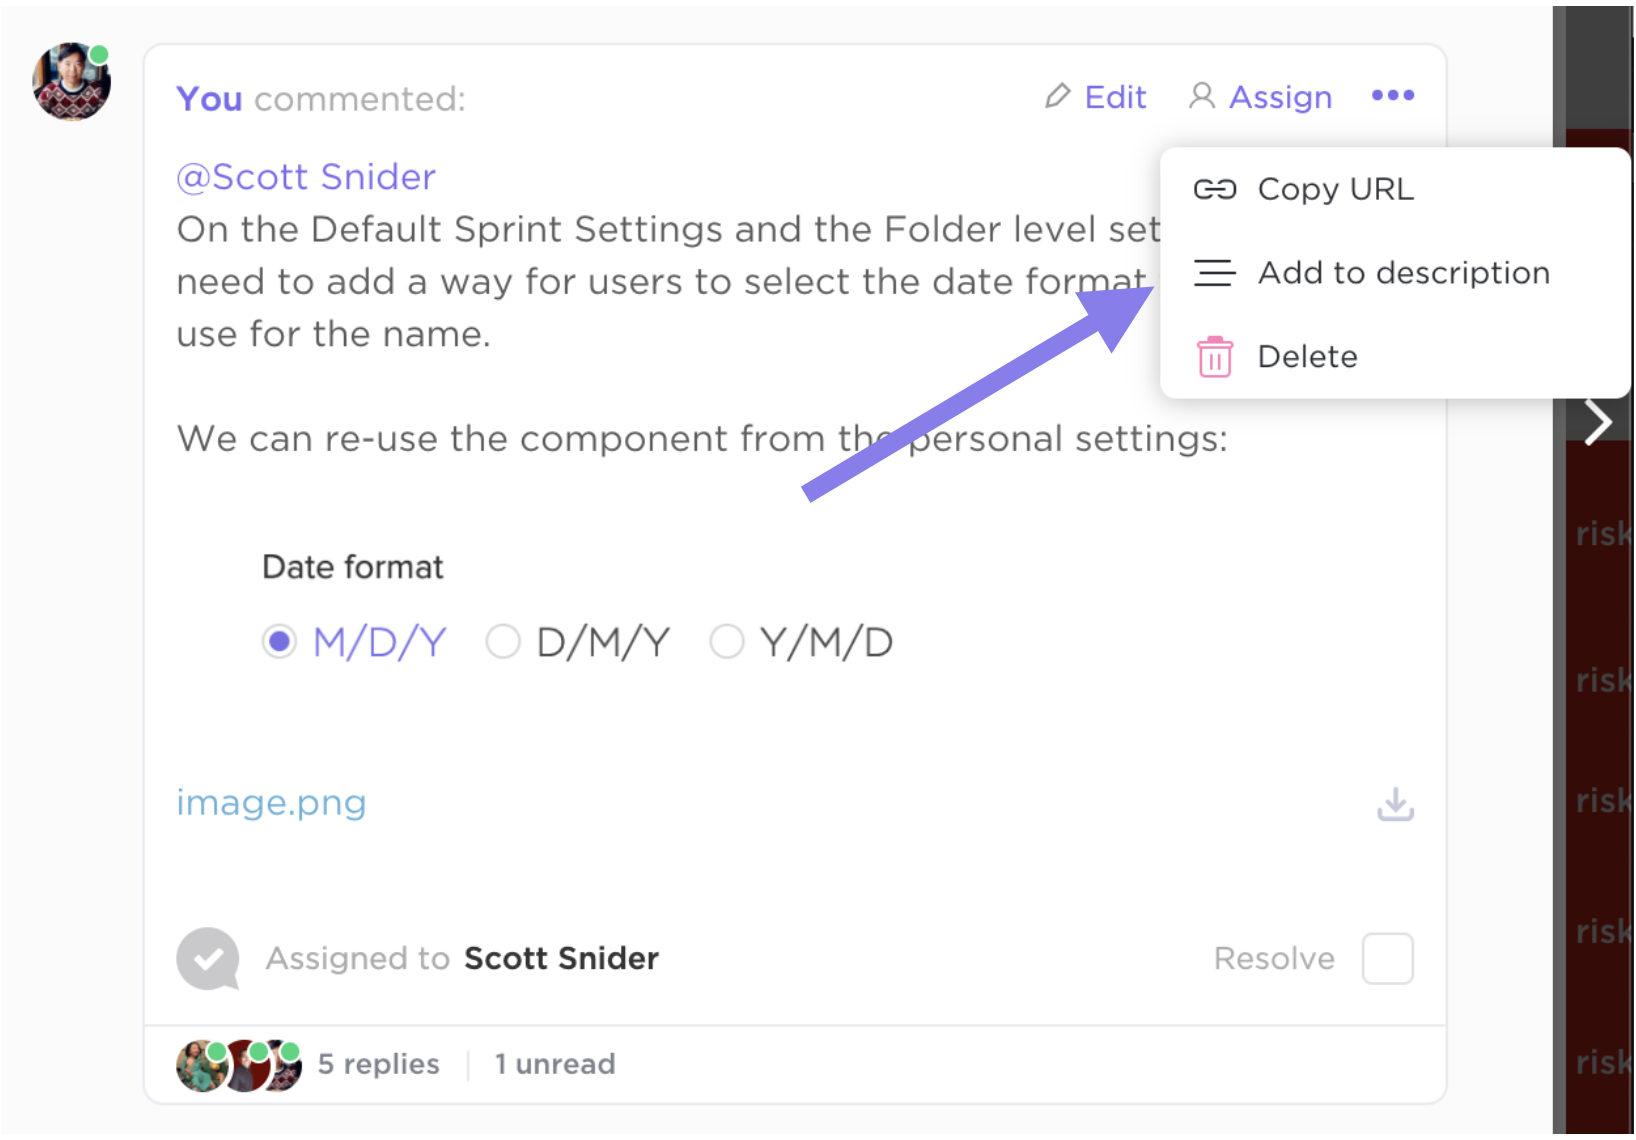 Image showing how to add comment content to a task description.